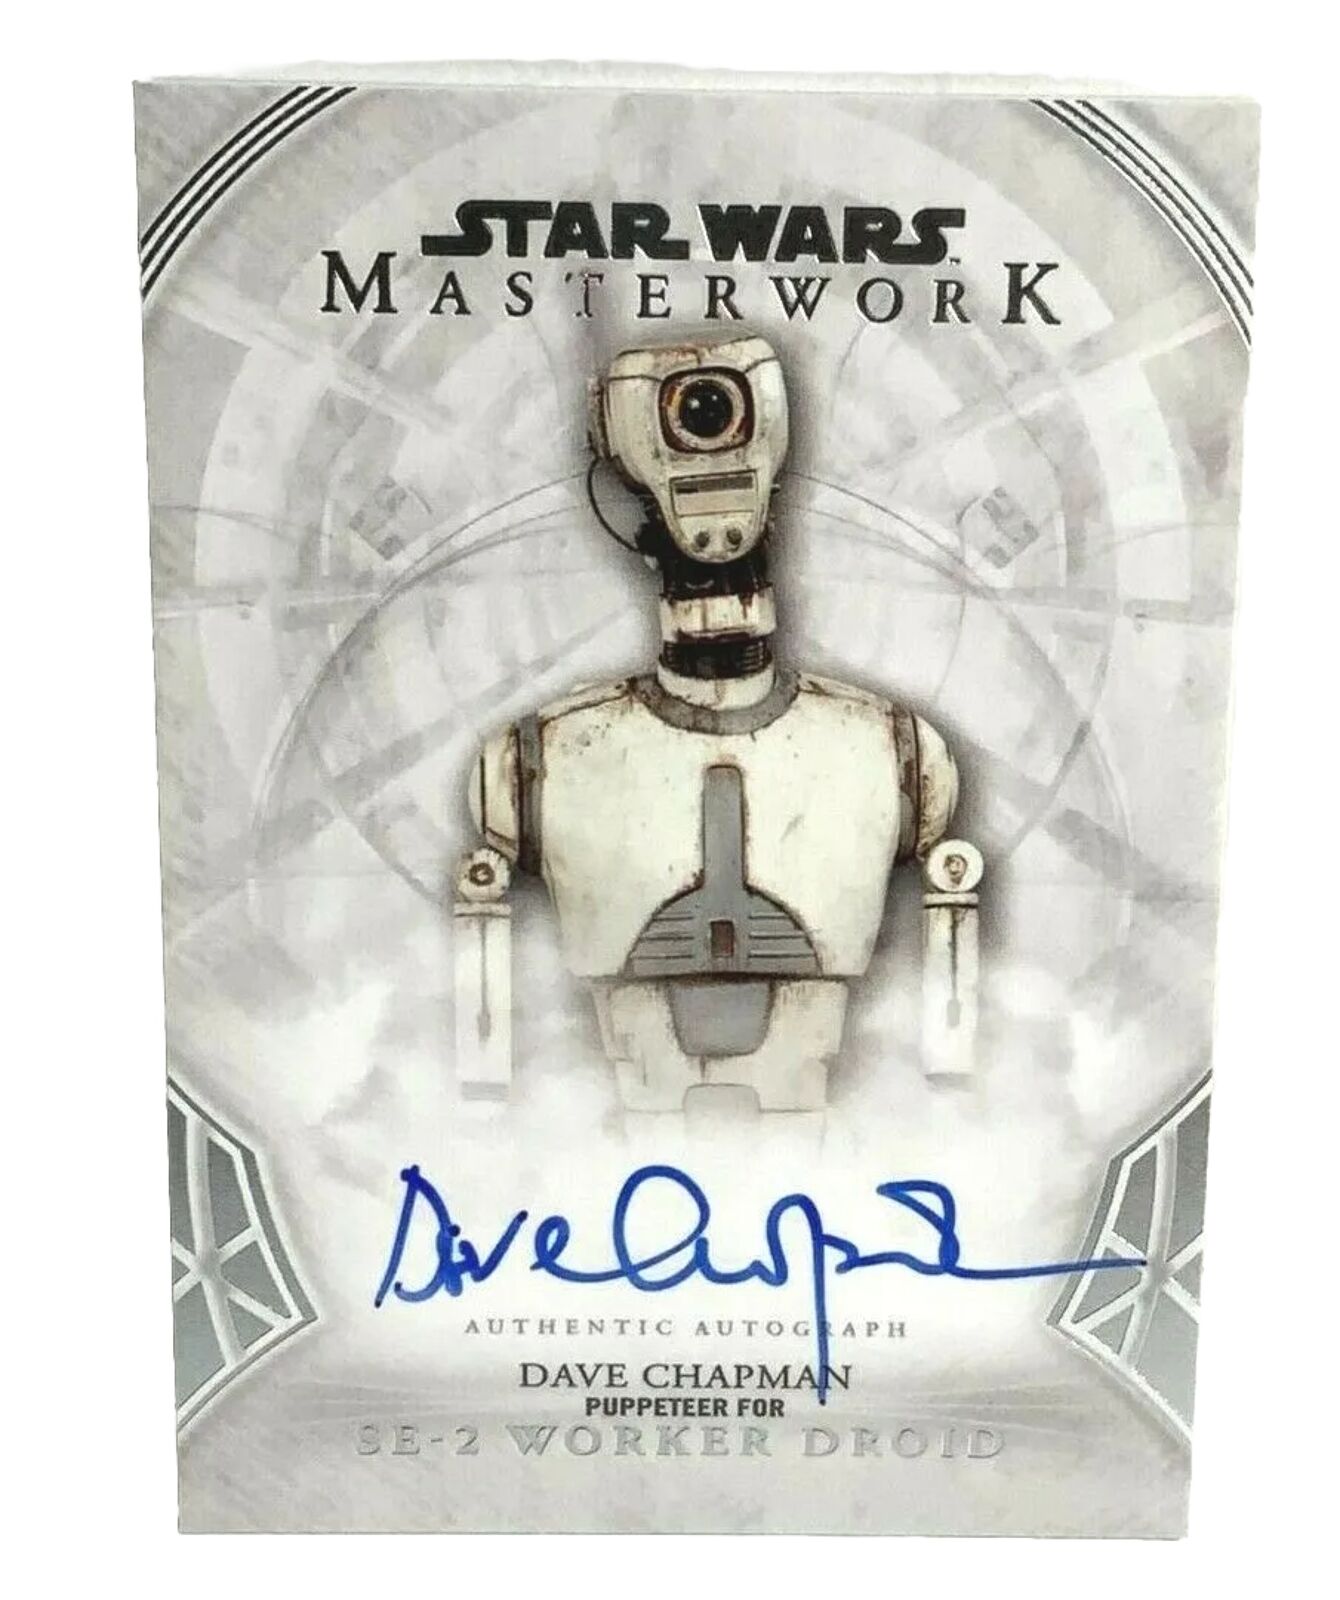 2018 Star Wars Masterwork #ADC Dave Chapman Puppeteer SE-2 Droid Autograph Card